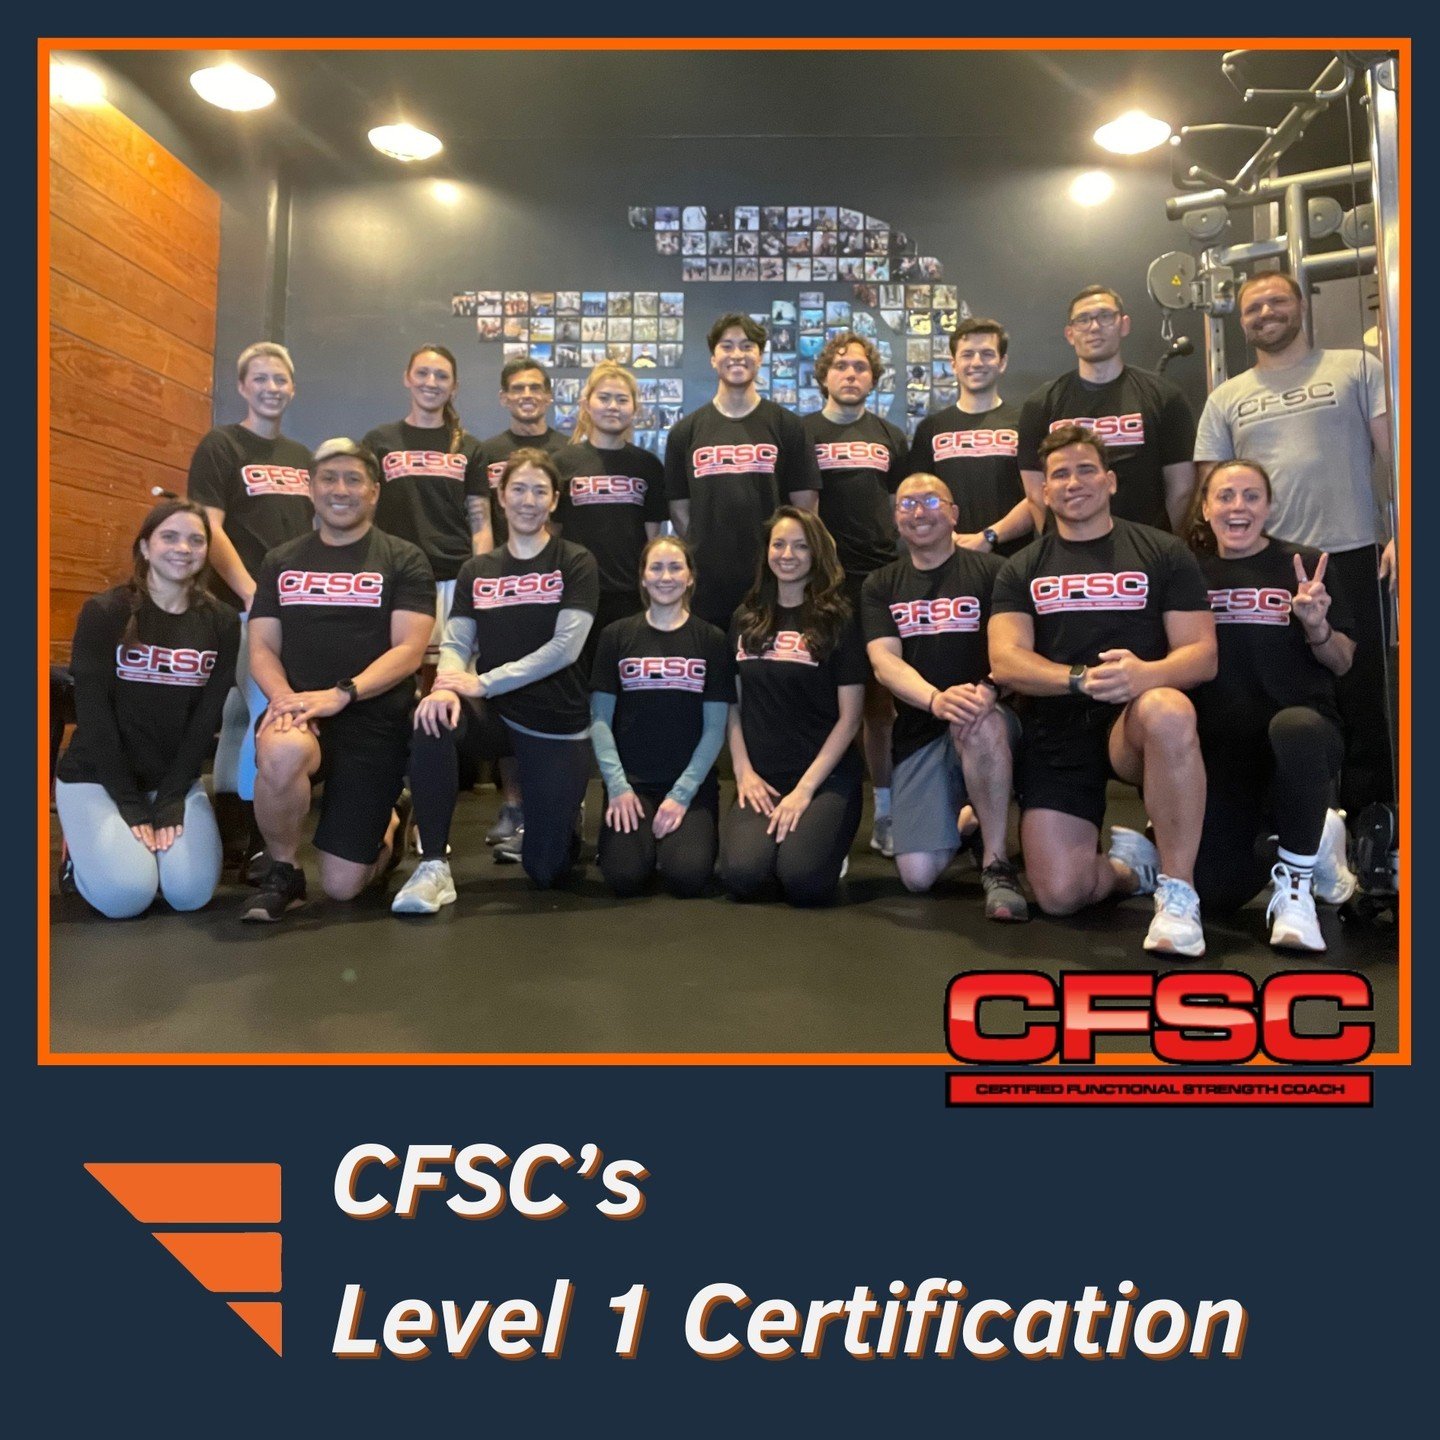 Over the weekend, DIAKADI had the honor of hosting the CFSC Level 1 Certification course led by Coach Brendon Rearick (@certifiedfsc)!⁠
⁠
Huge congratulations to all the newly certified Level 1 coaches! Keep fueling your passion for fitness education